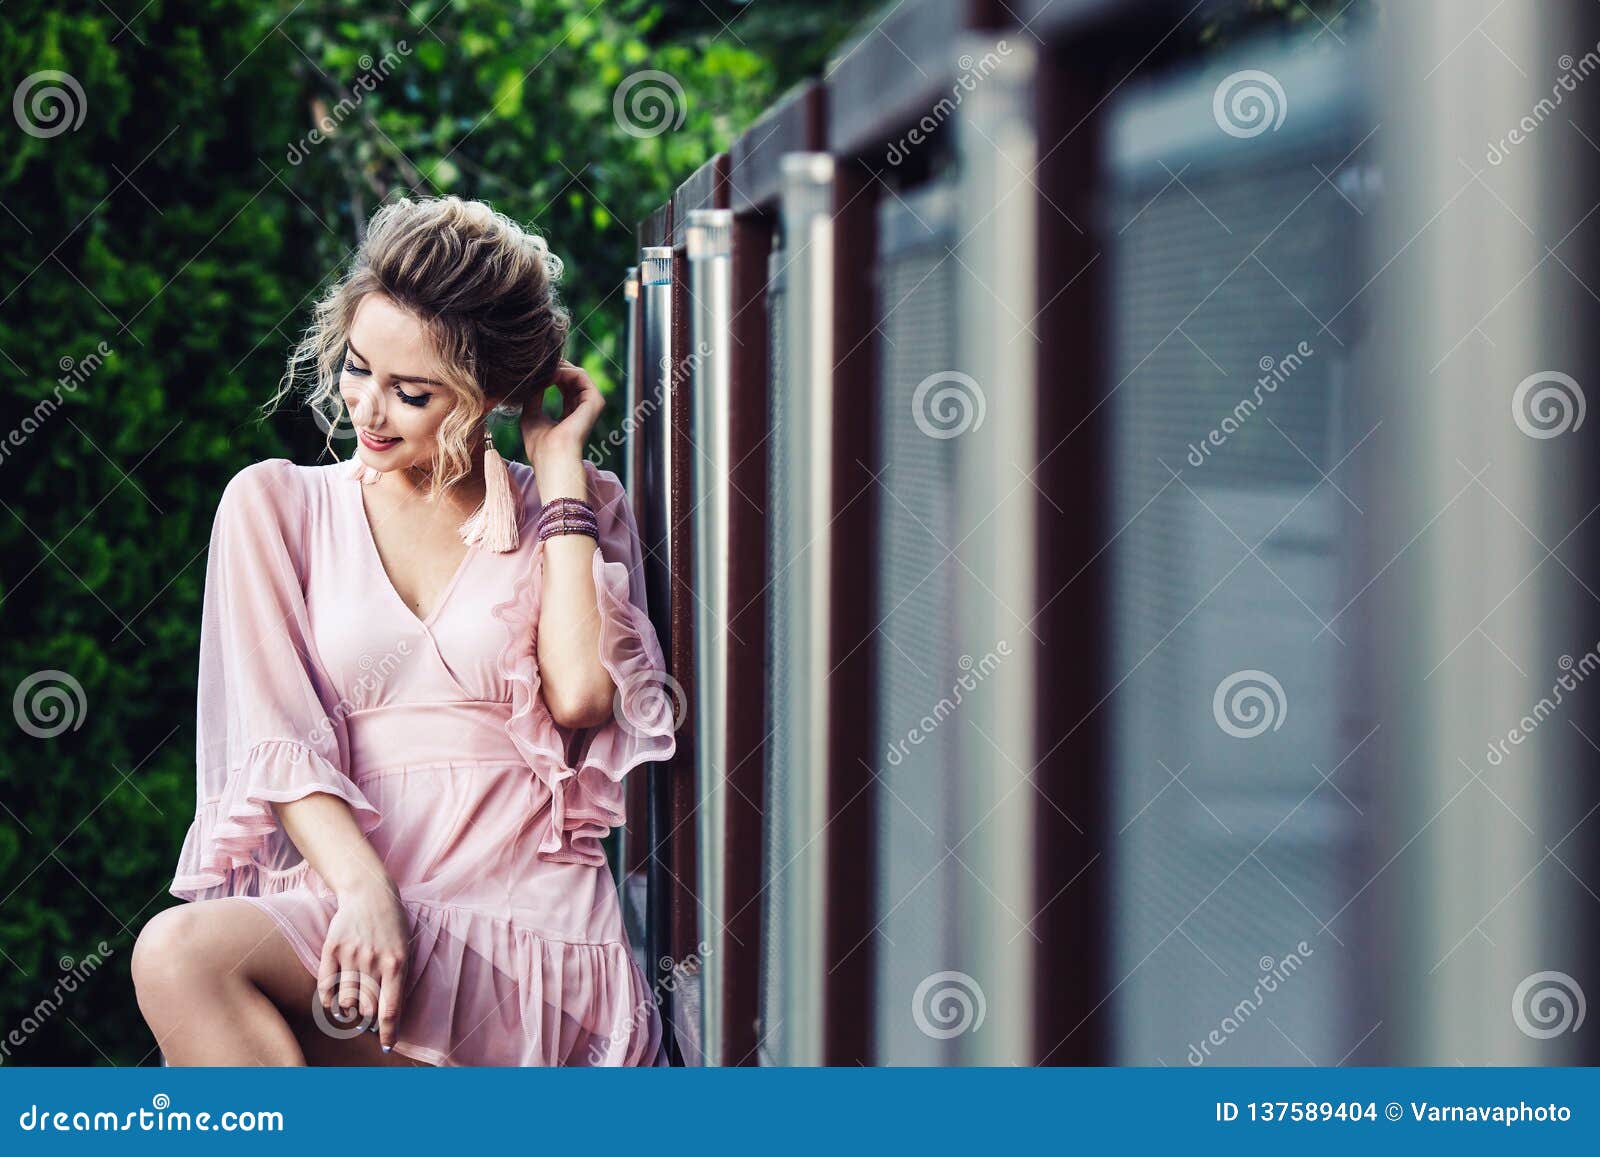 Attractive Young Girl in a Short Pink Dress Posing Near a Steel Fence ...